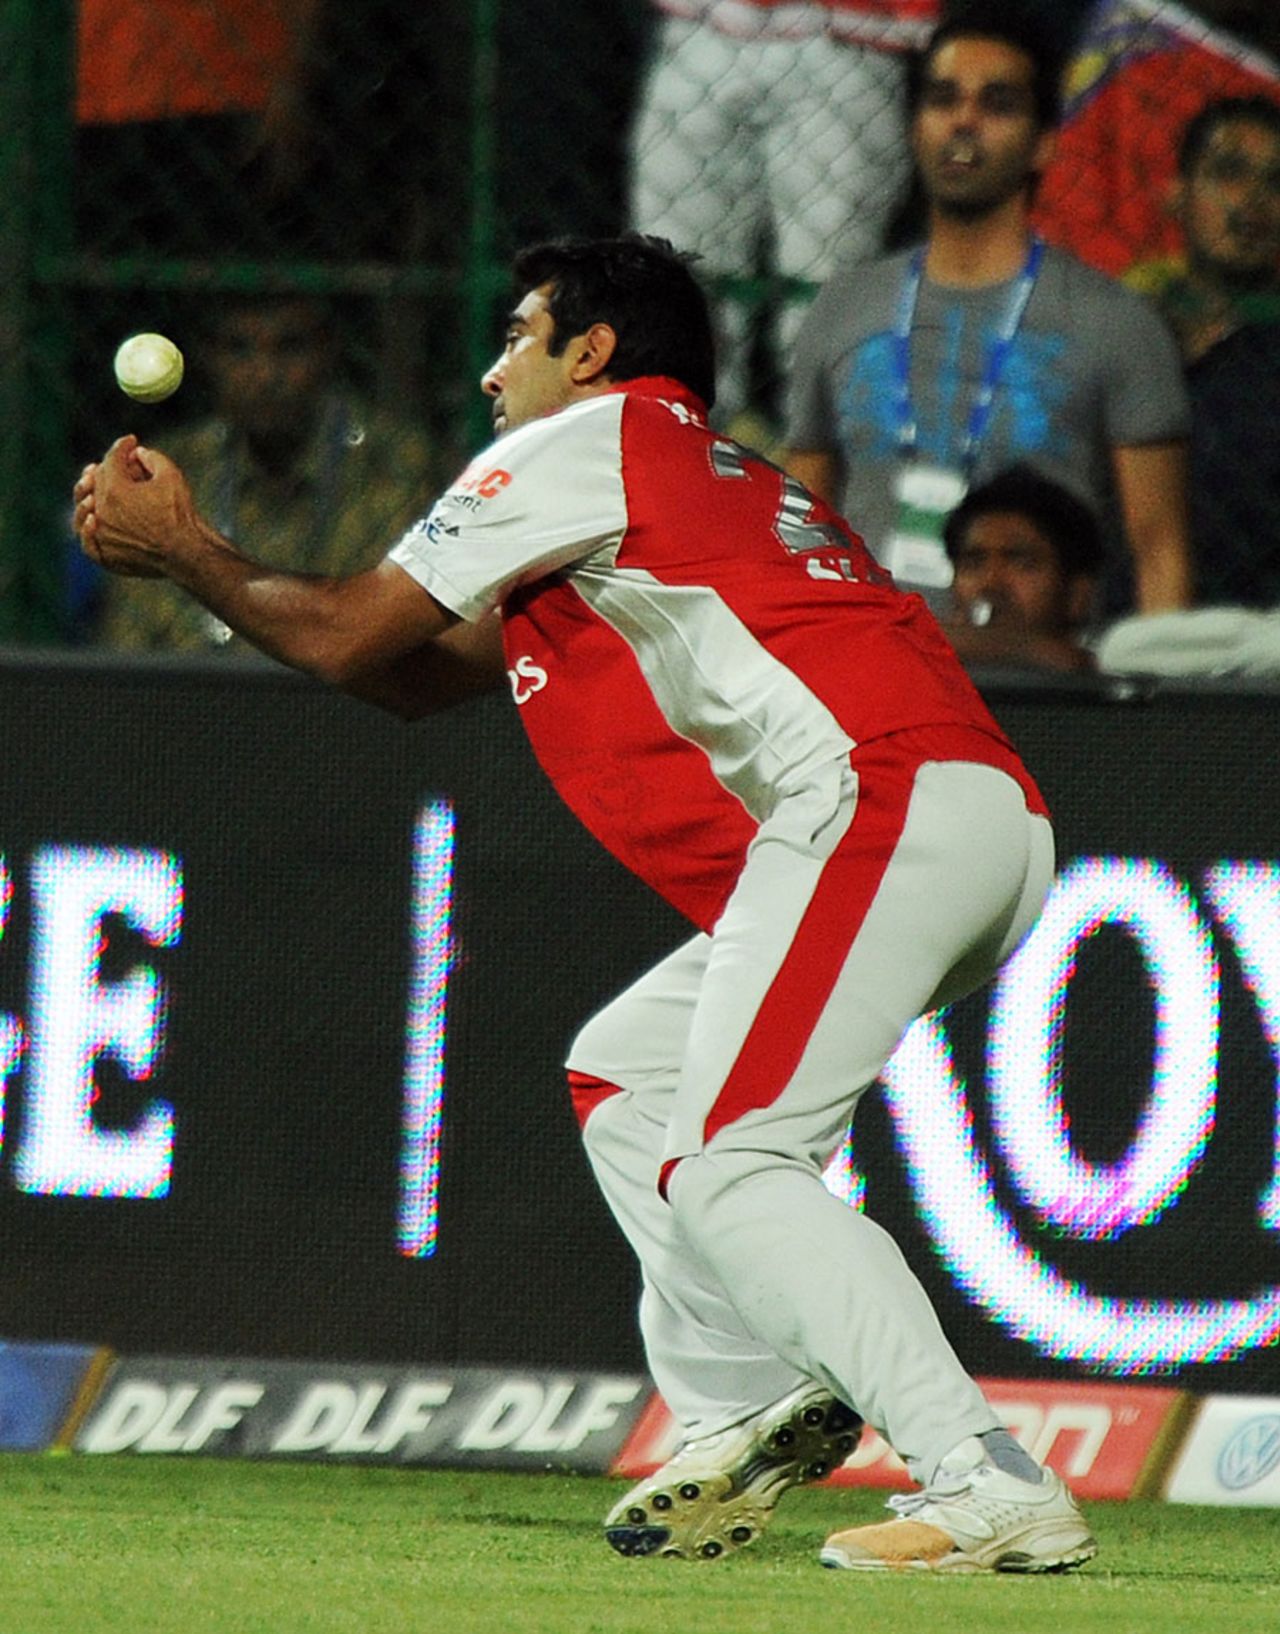 Sunny Singh gave Chirs Gayle a reprieve but he was dismissed the very next ball, Royal Challengers Bangalore v Kings XI Punjab, IPL 2011, Bangalore, May 6, 2011